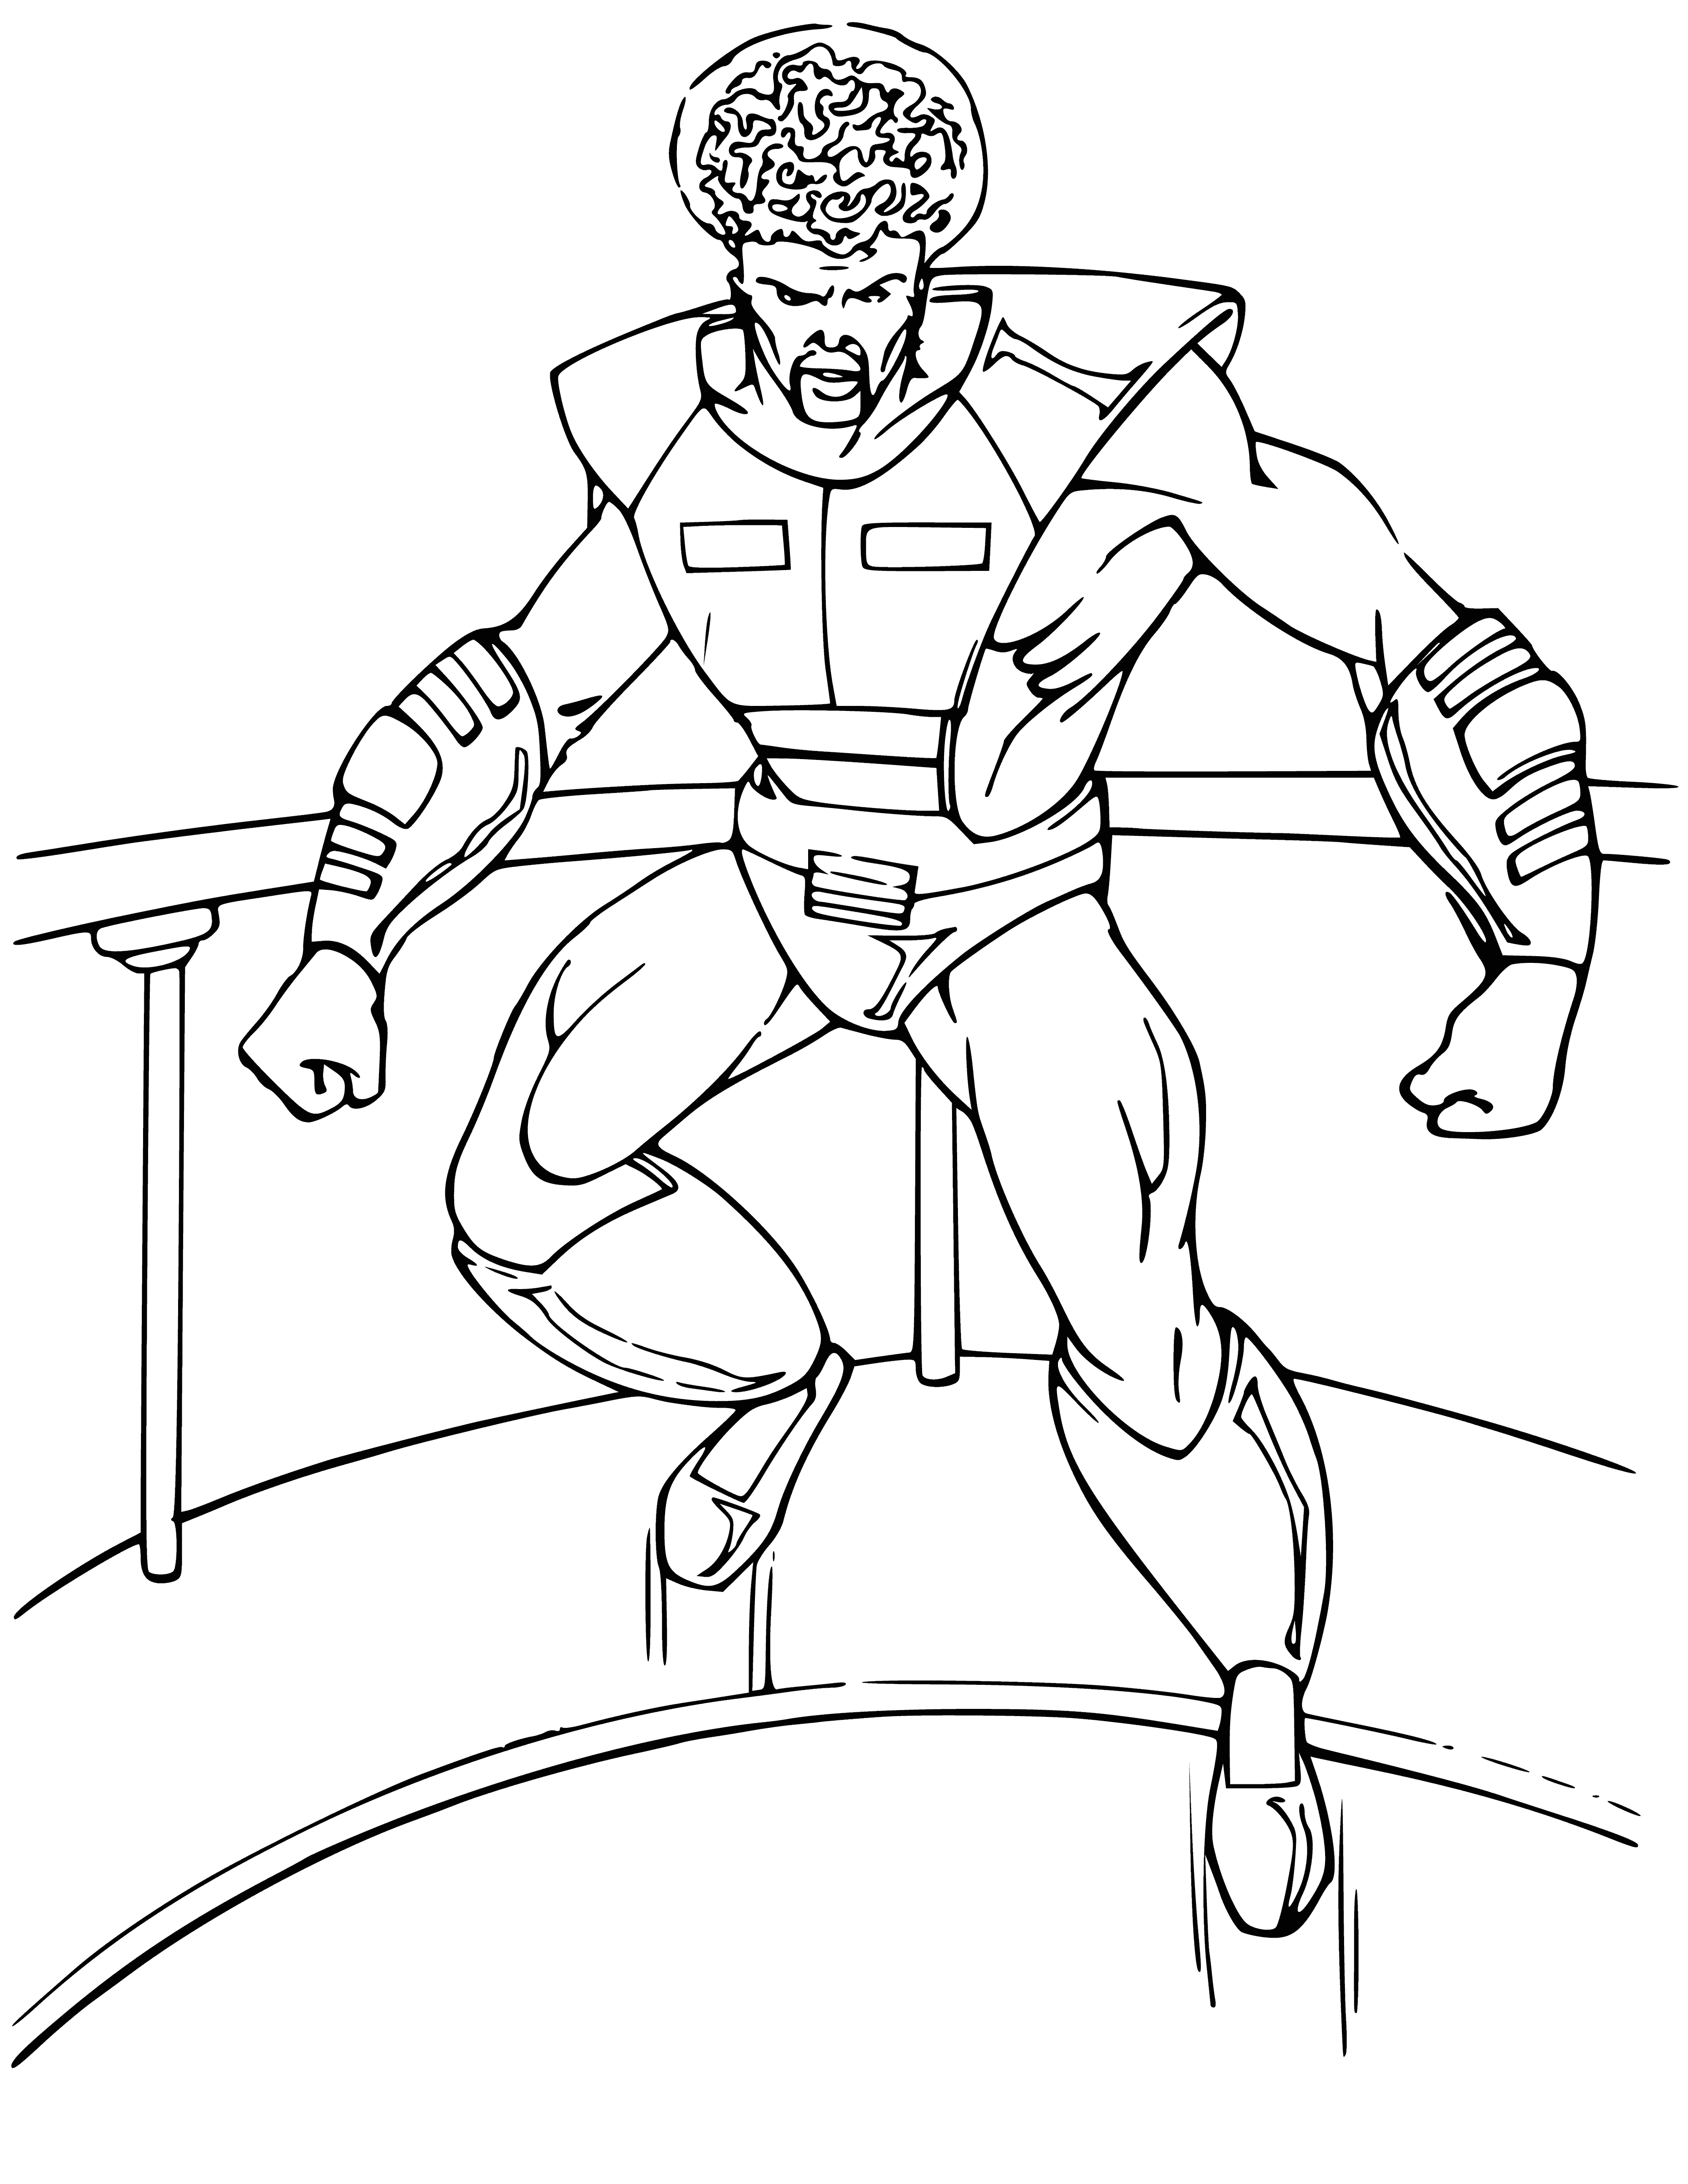 coloring page: The green, muscular Hulk is a super-strong hero who can save the day with his superhuman strength & speed. #Avengers